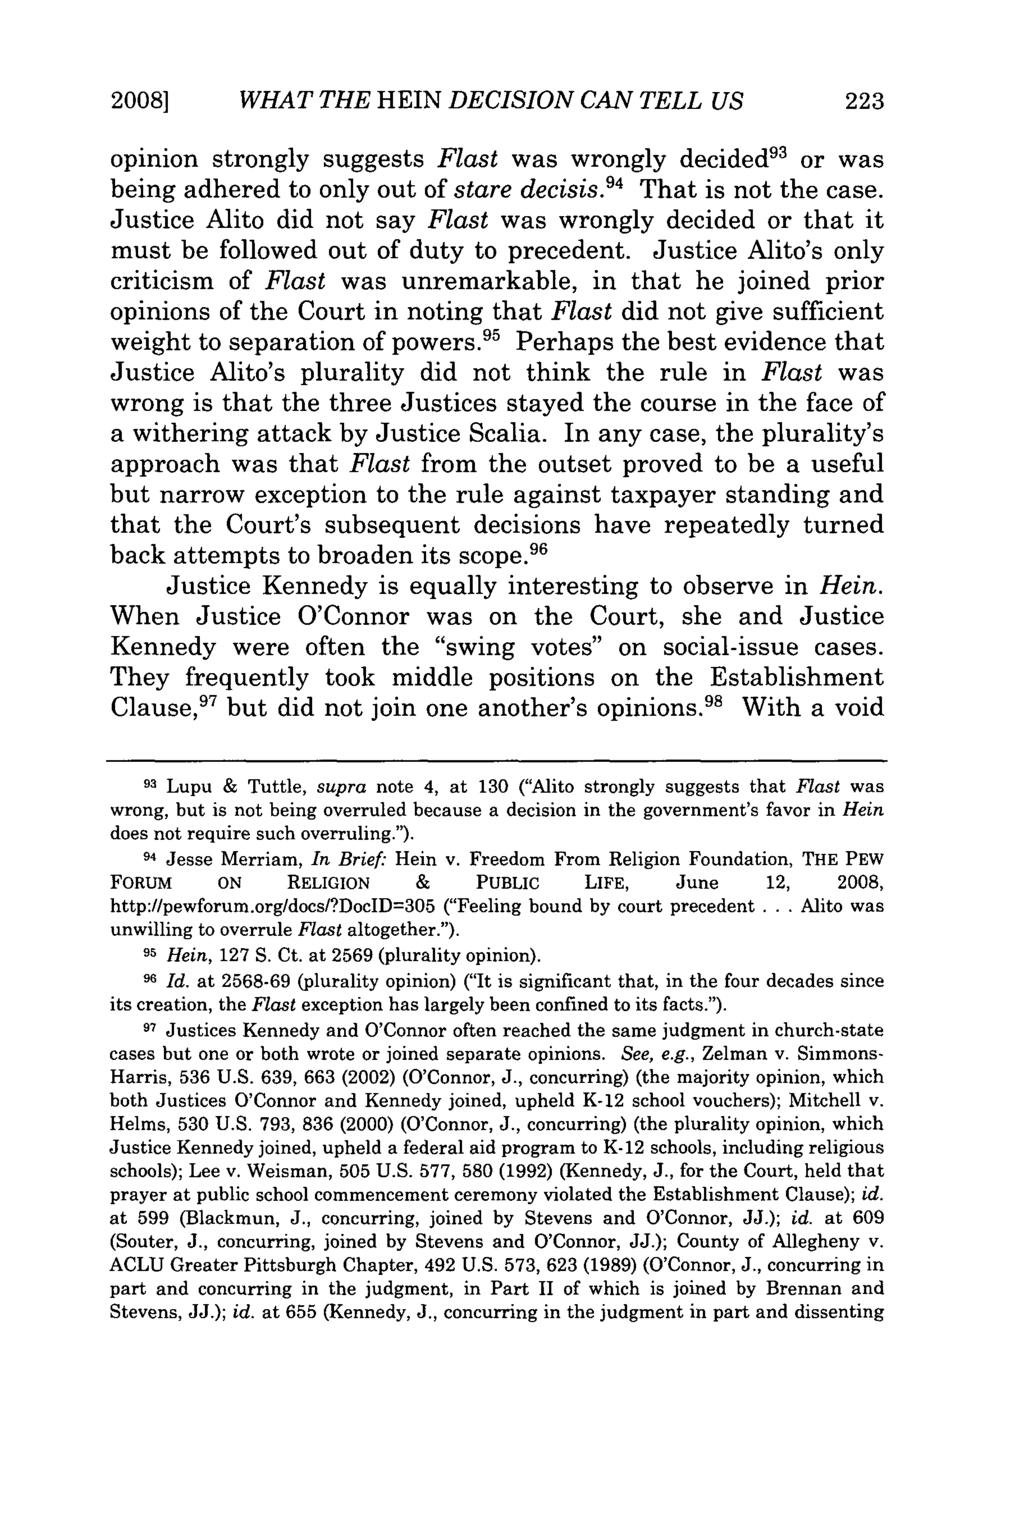 2008] WHAT THE HEIN DECISION CAN TELL US opinion strongly suggests Flast was wrongly decided" or was being adhered to only out of stare decisis. 94 That is not the case.